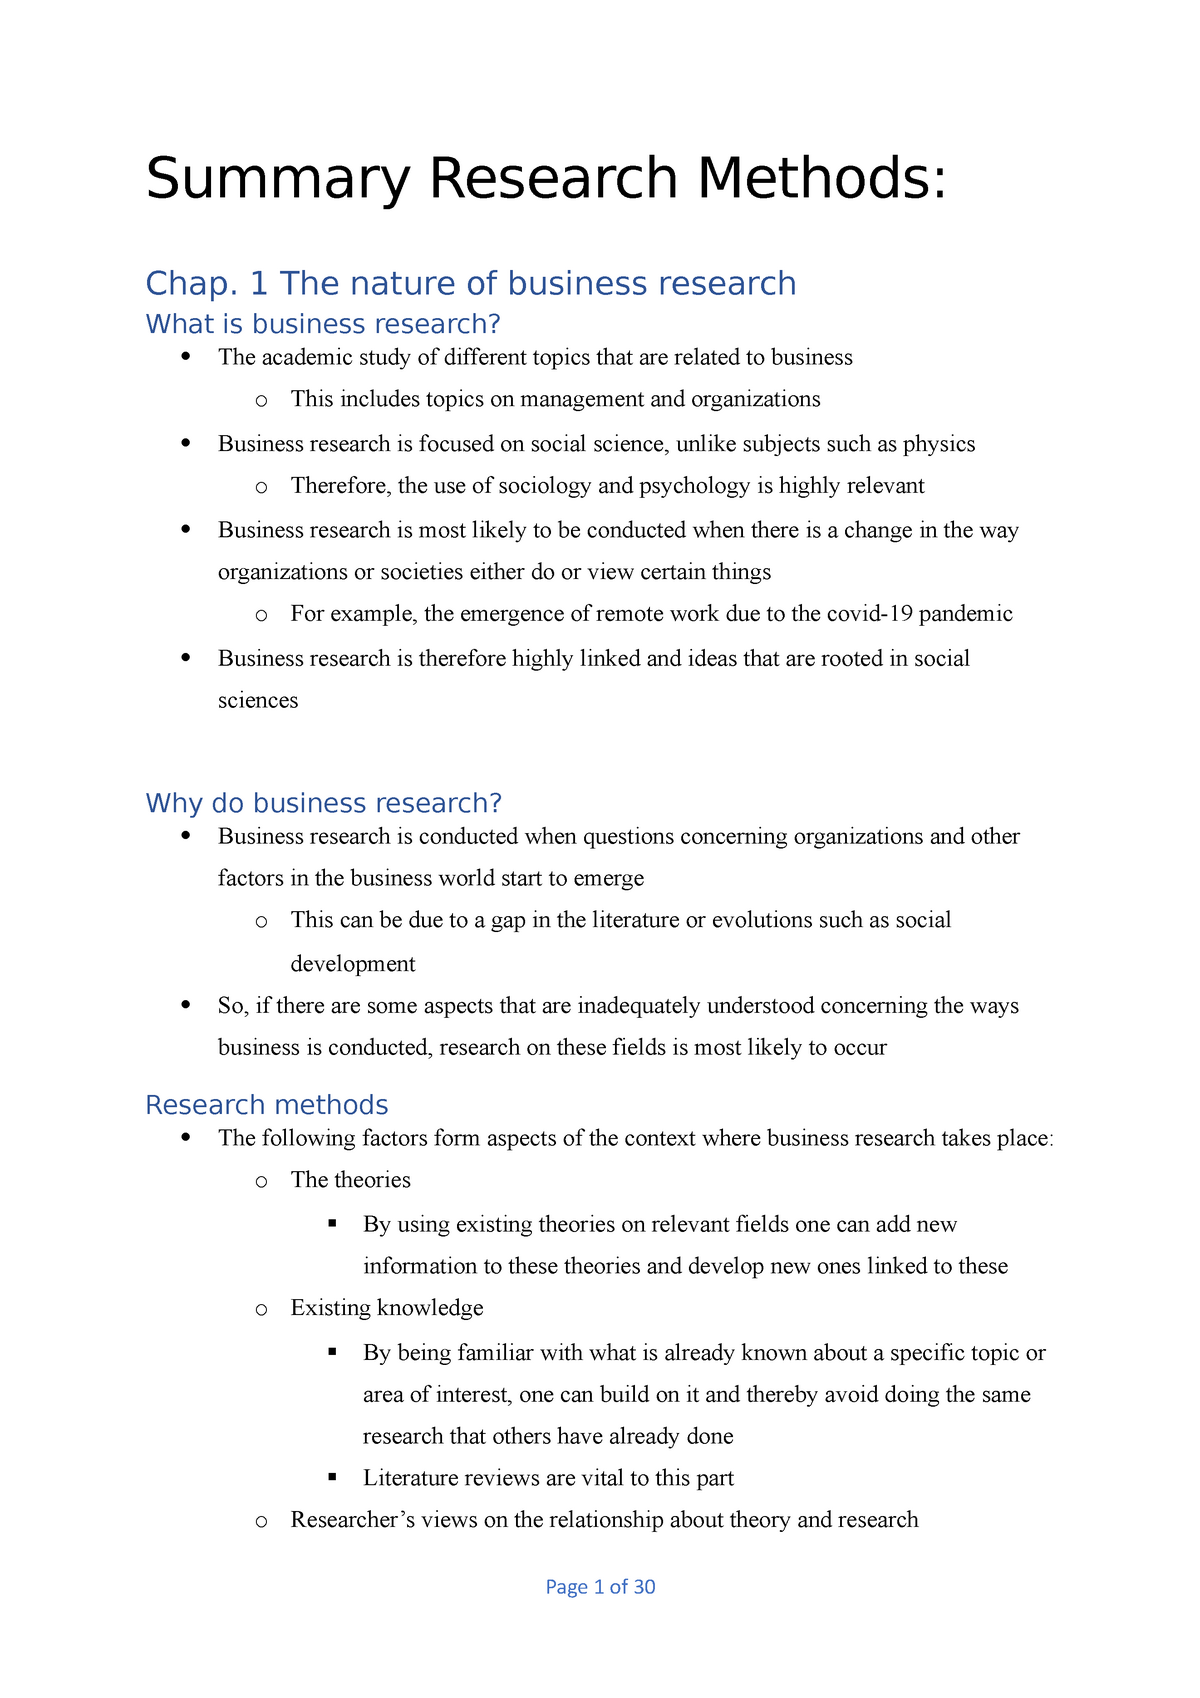 business research methods summary